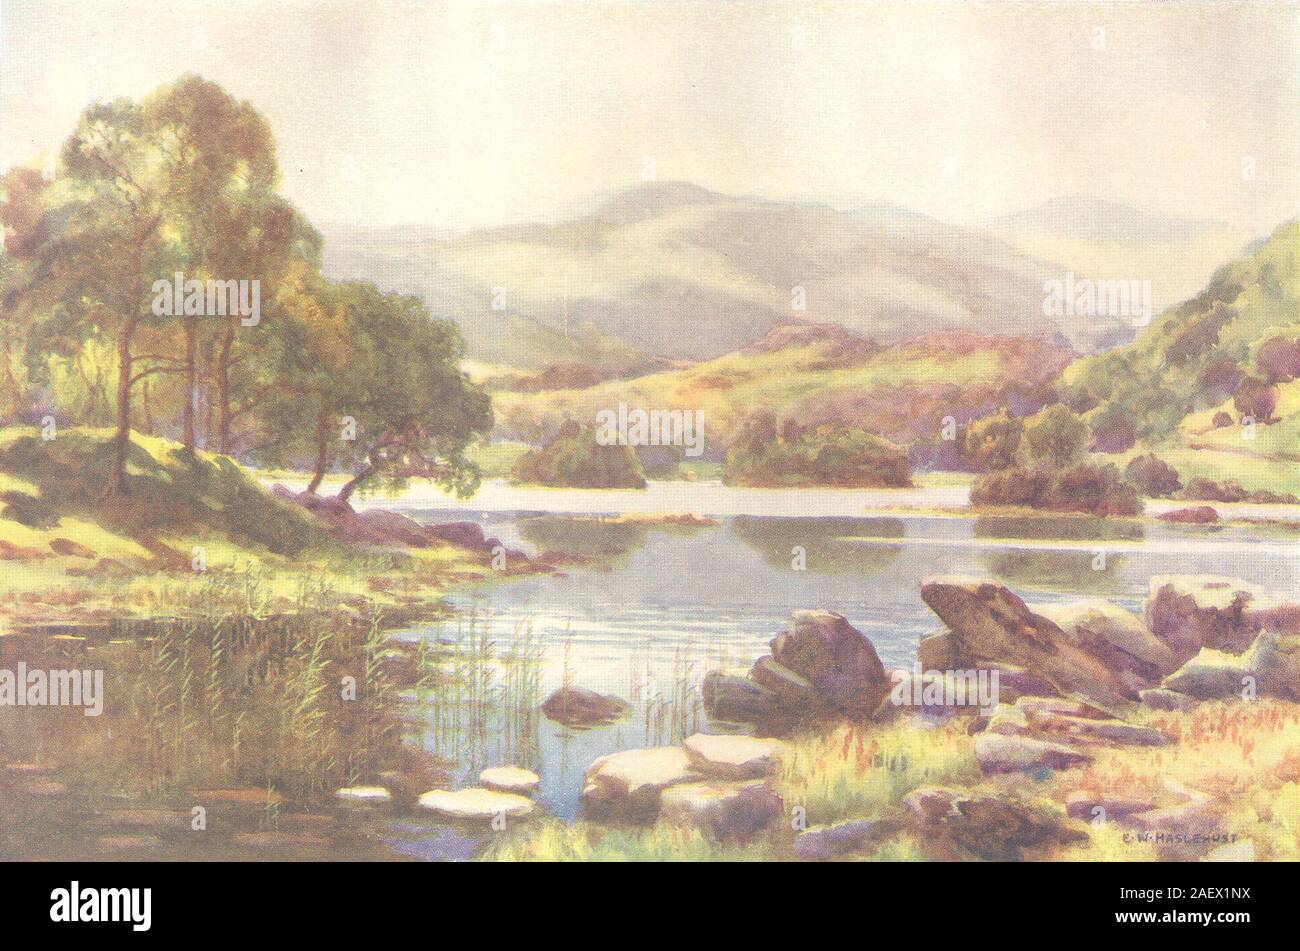 Rydalmere, Lake district. Cumbria. By Ernest Haslehust 1920 old vintage print Stock Photo